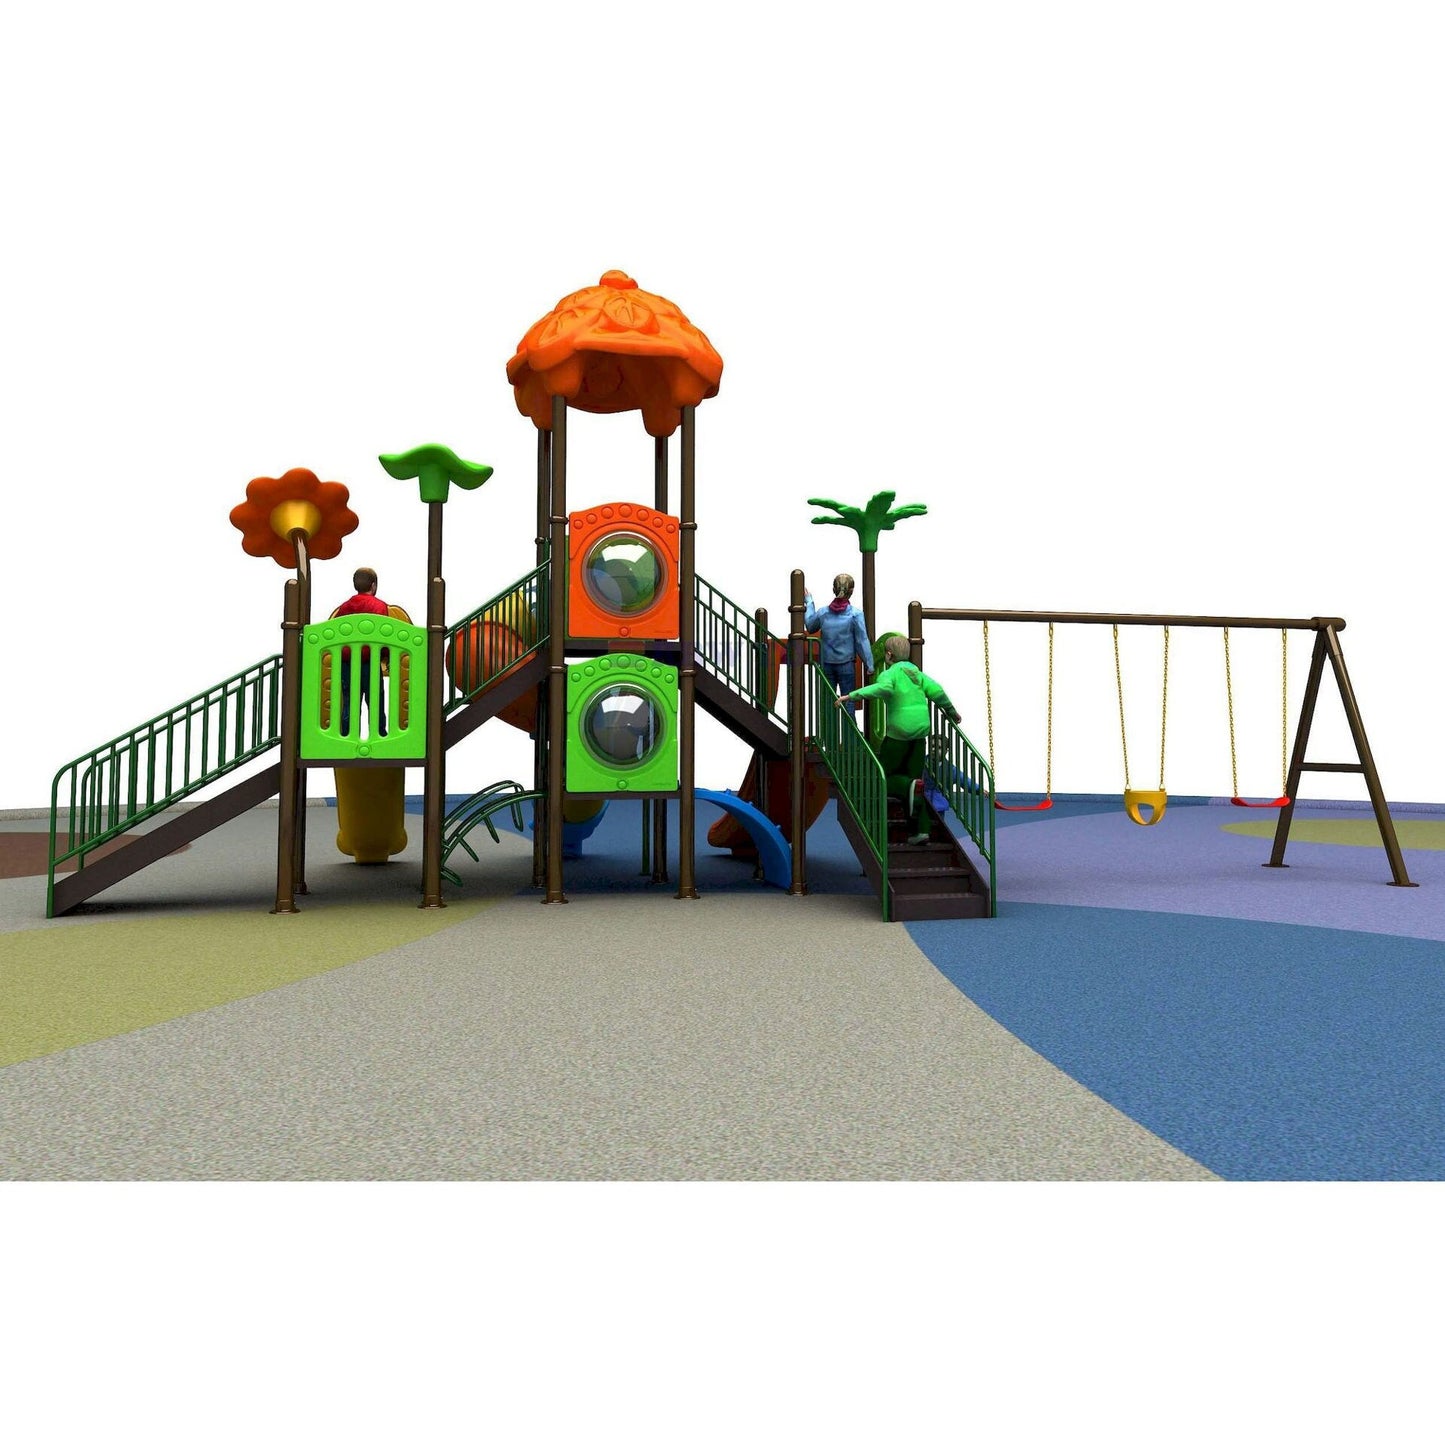 RBW Toys Outdoor Playground Swing Slide for Kids, RW-11017, 9x4.5x5M - COOLBABY